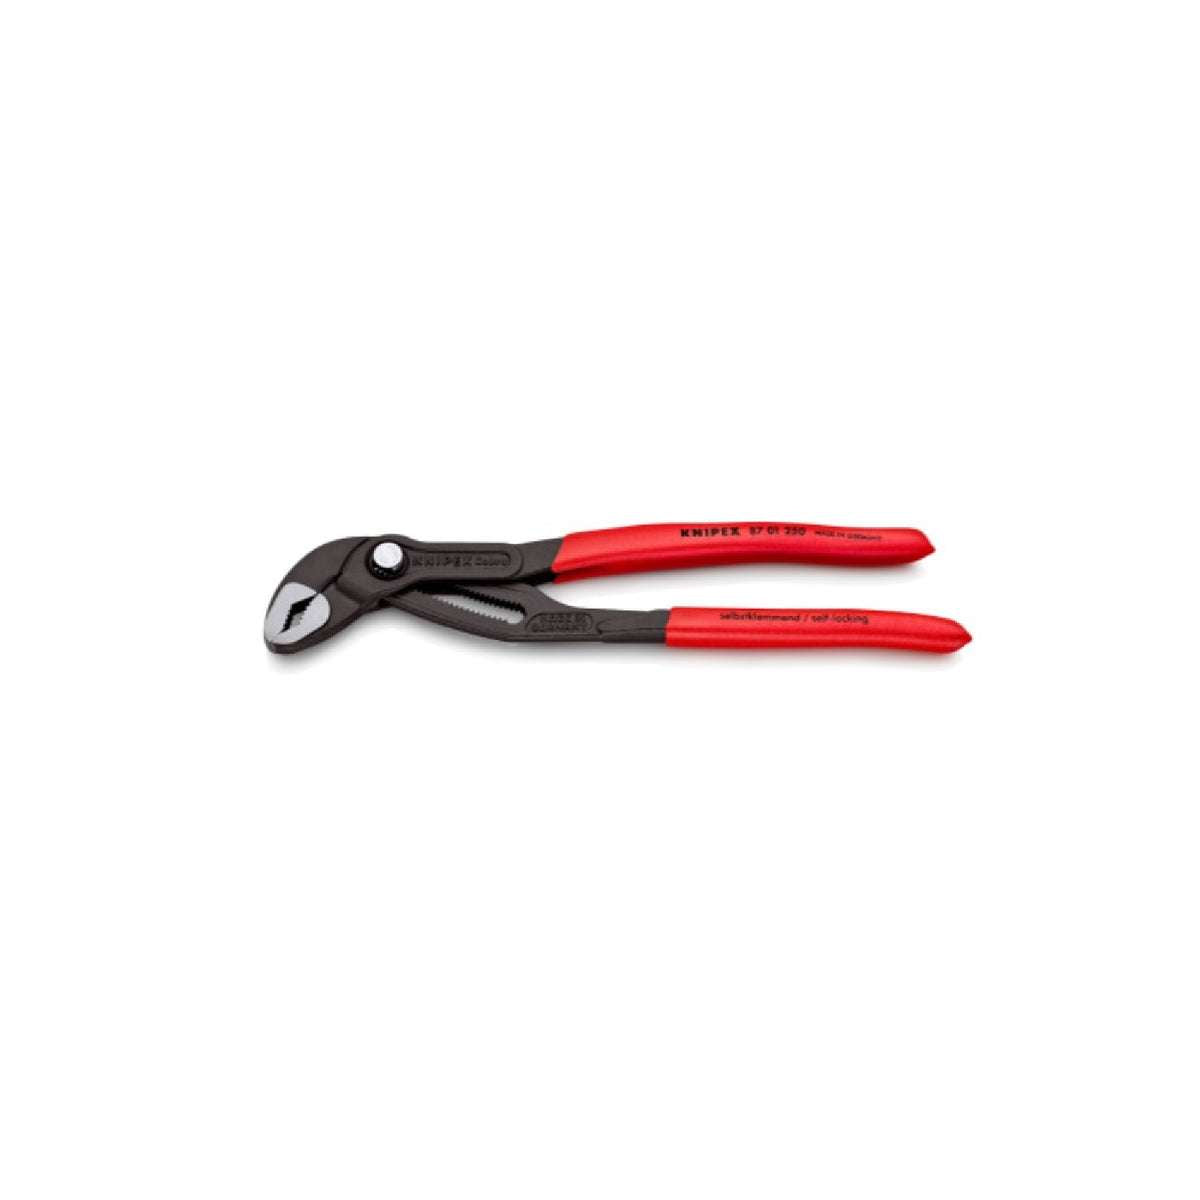 Pliers for external circlips on shafts 85-140mm - Knipex 4621A41